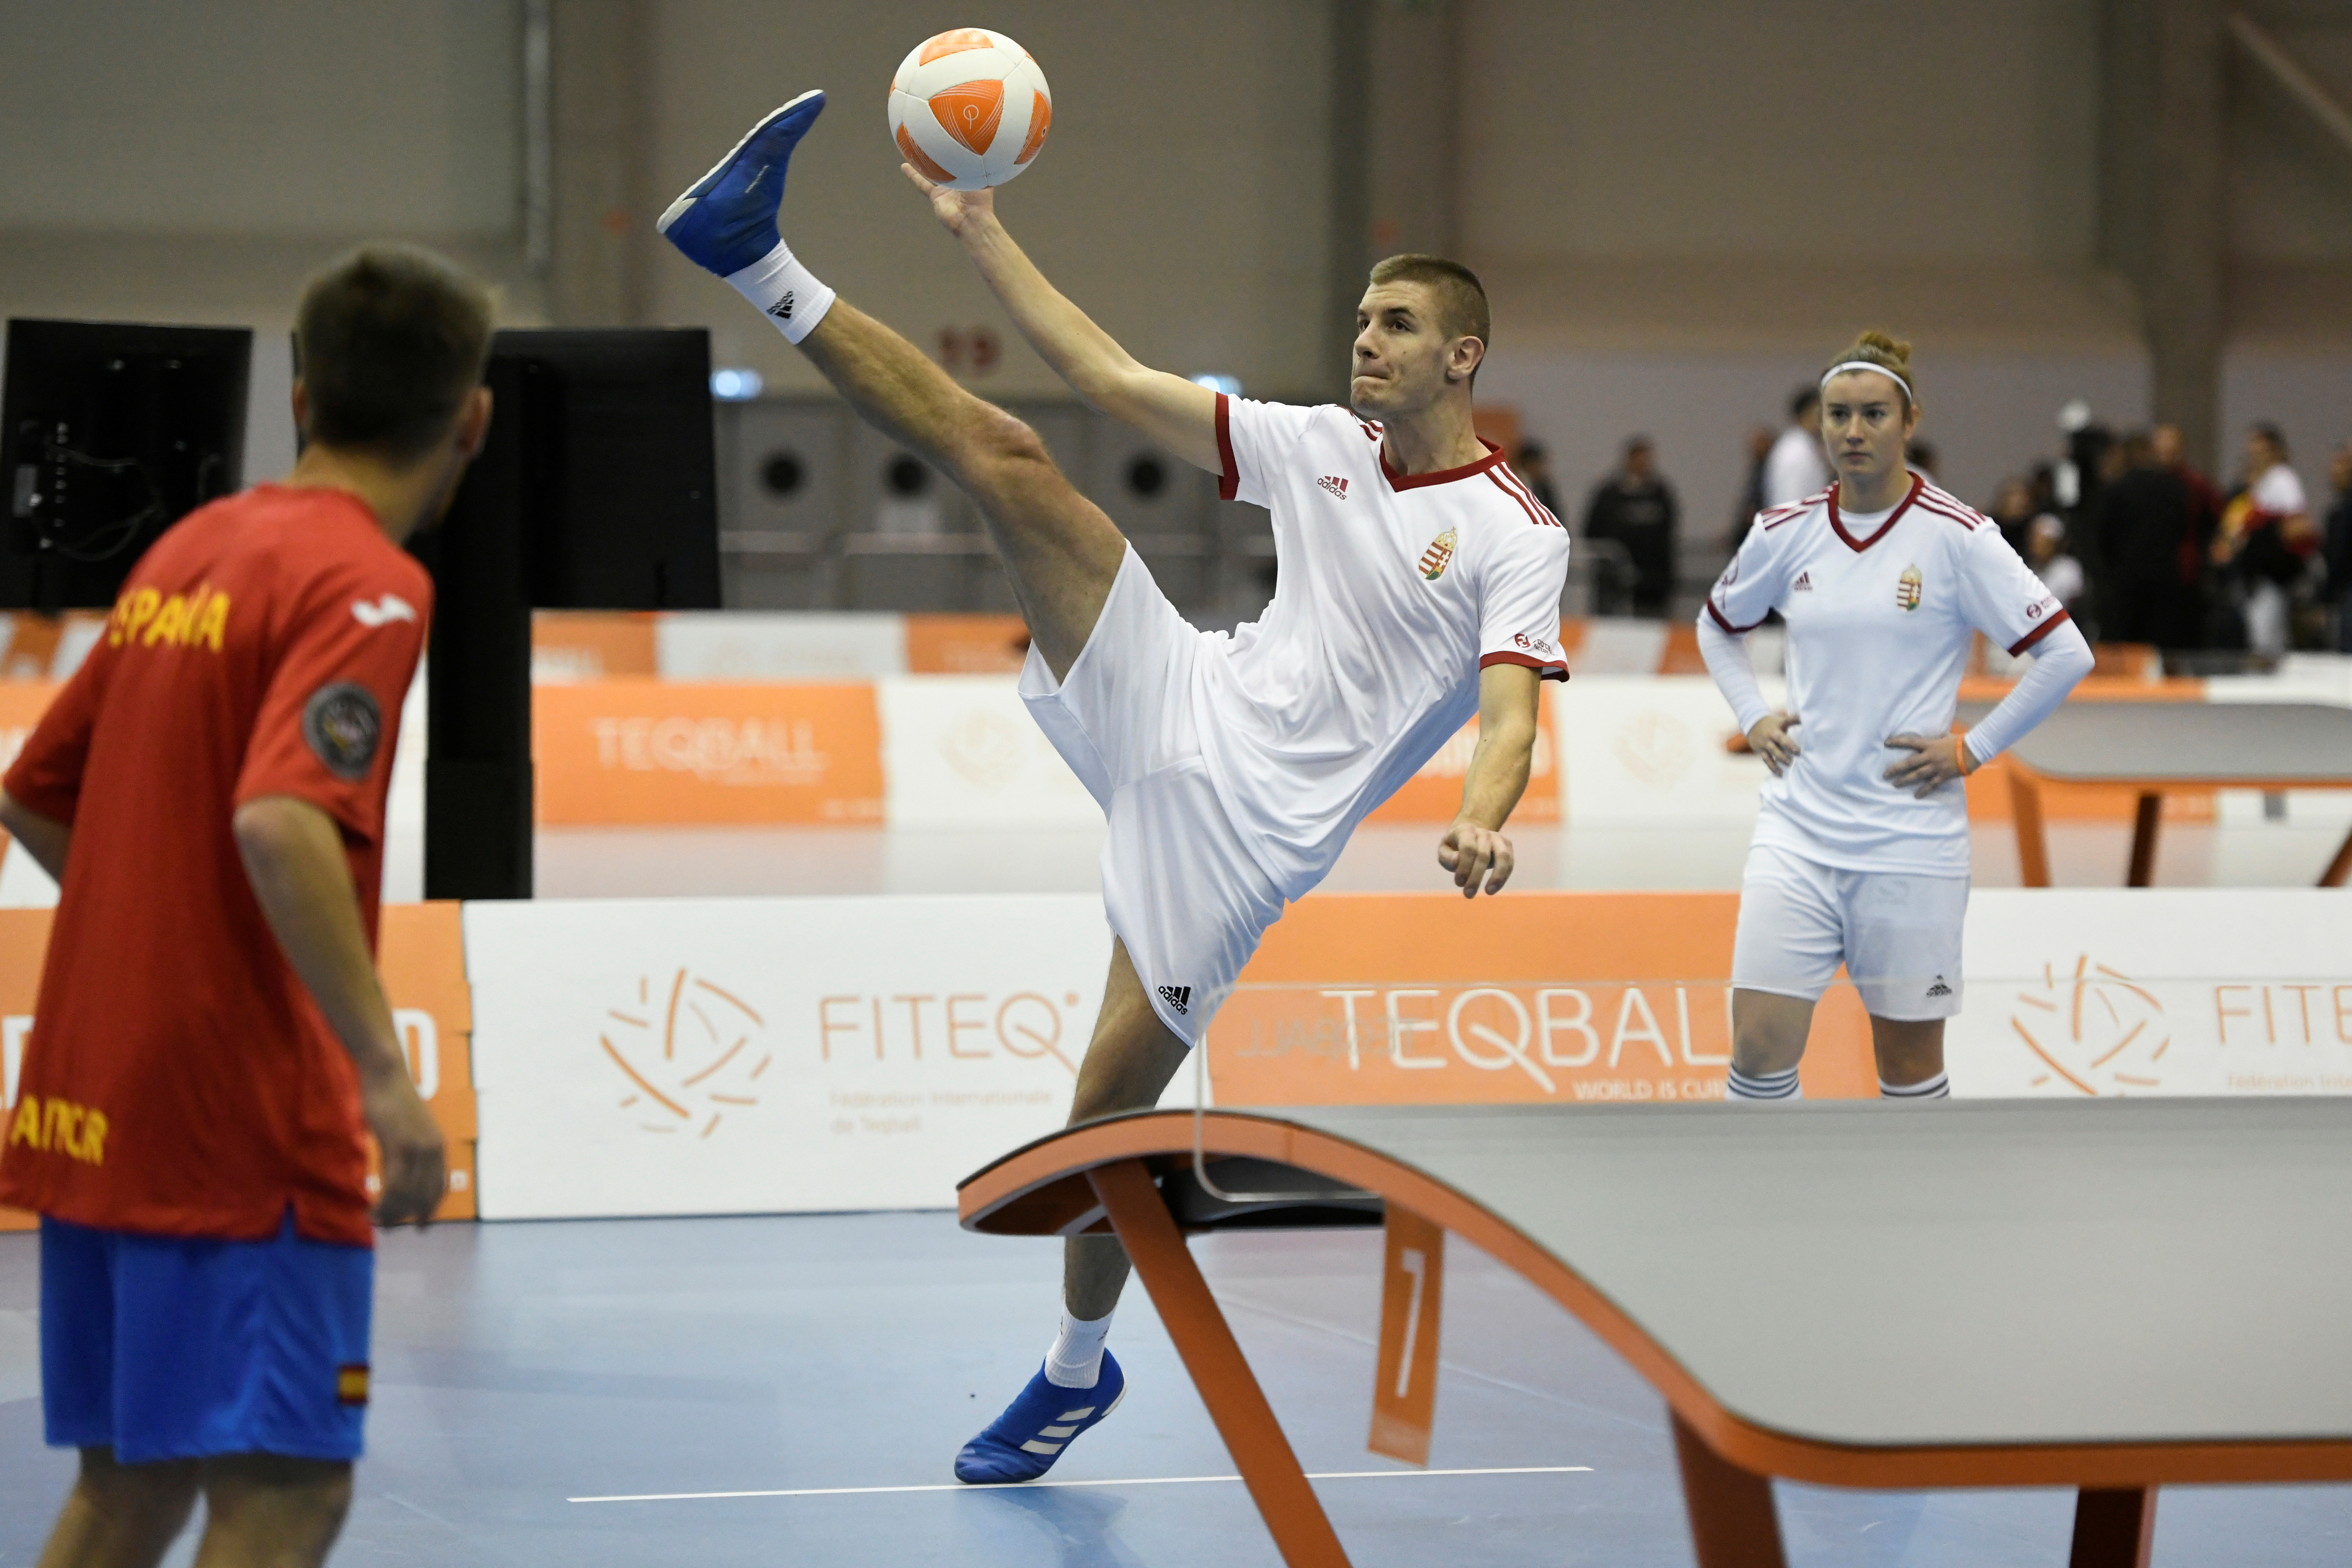 Csaba Banyik of Hungary in action at the Teqball World Championships in Budapest, Hungary December 6, 2019. Picture taken December 6, 2019. REUTERS/Tamas Kaszas